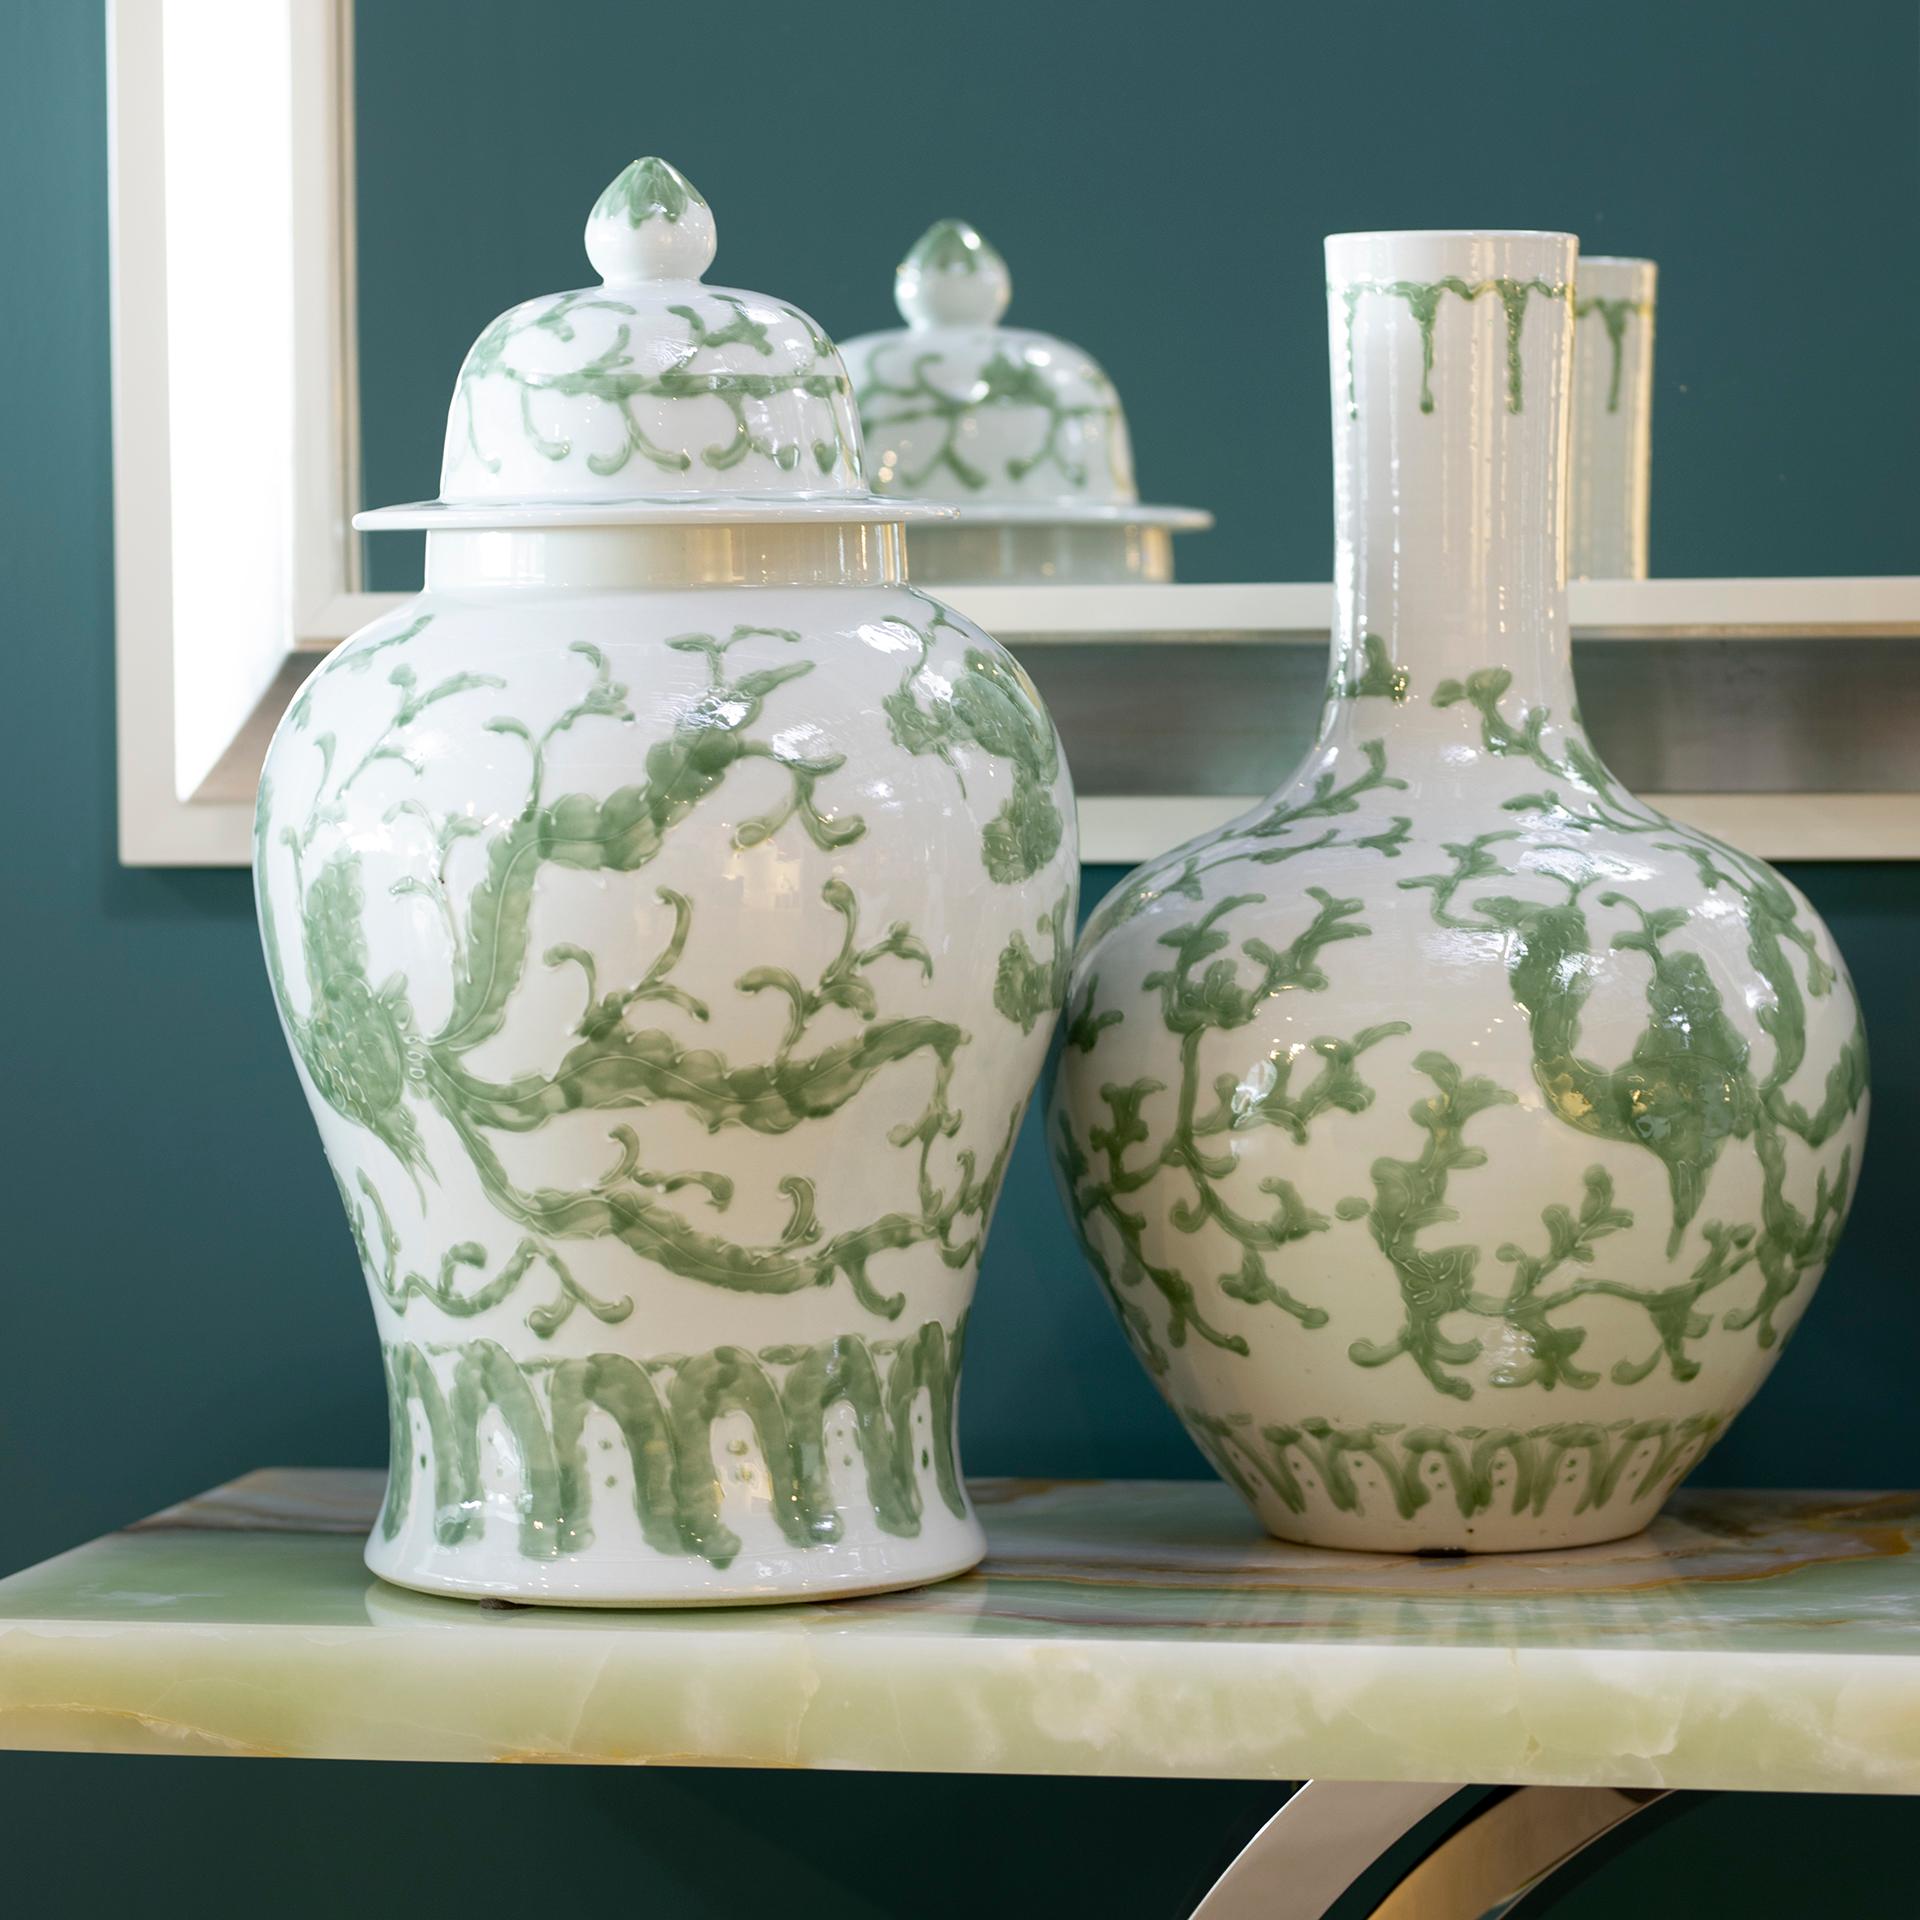 Set/2 Shu Porcelain Pots, Lusitanus Home Collection by Legend of Asia.

Real chinese porcelain waterproof pots with lids in white and green, produced by hand with traditional methods. The longtime relationship between Portugal and Macau is